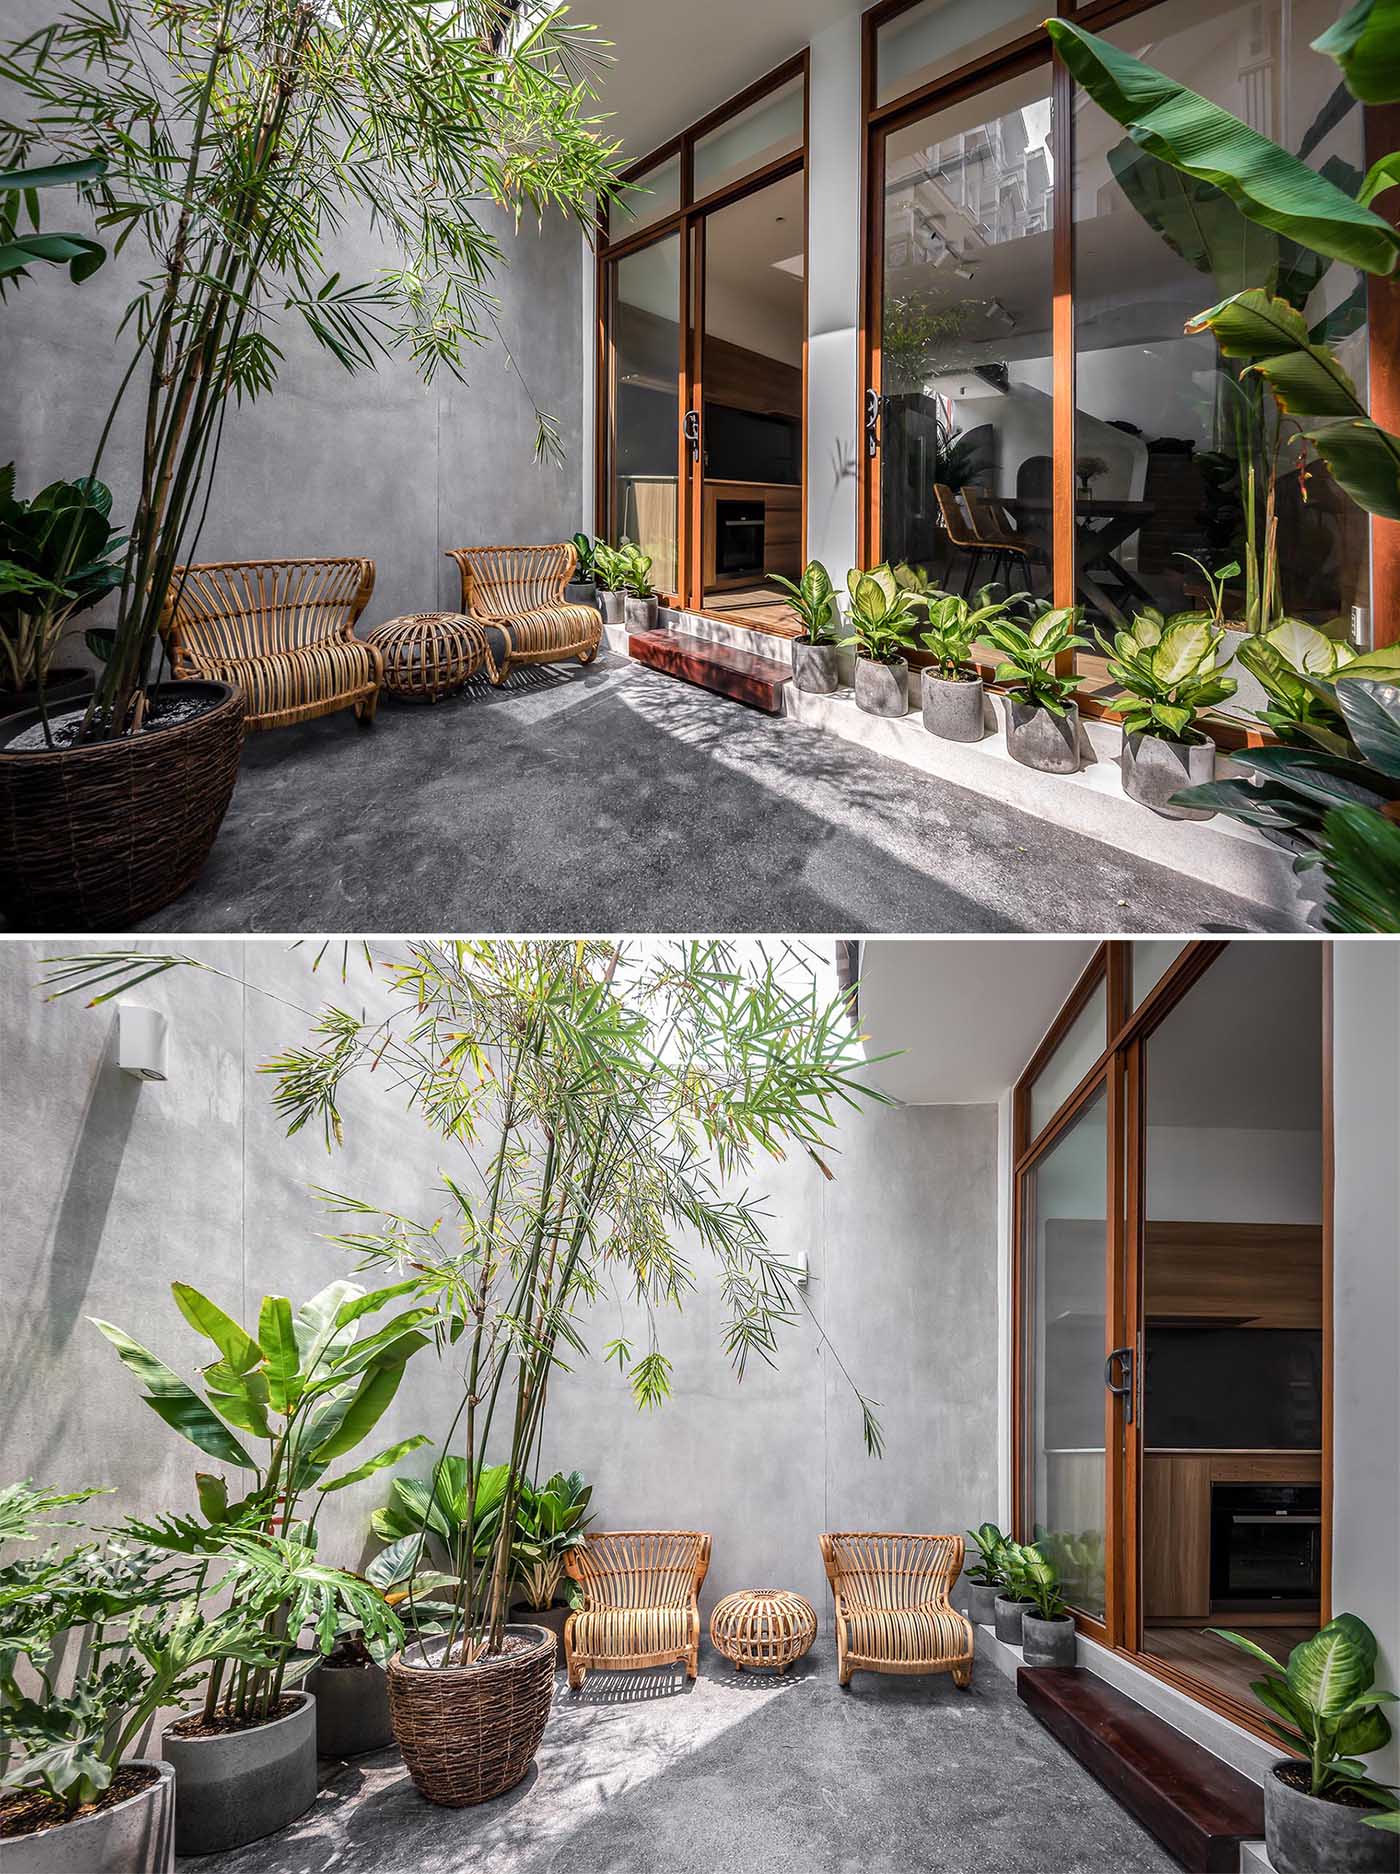 A sliding glass door off the kitchen and dining room opens to a private courtyard filled with wicker furniture, bamboo, and potted plants.